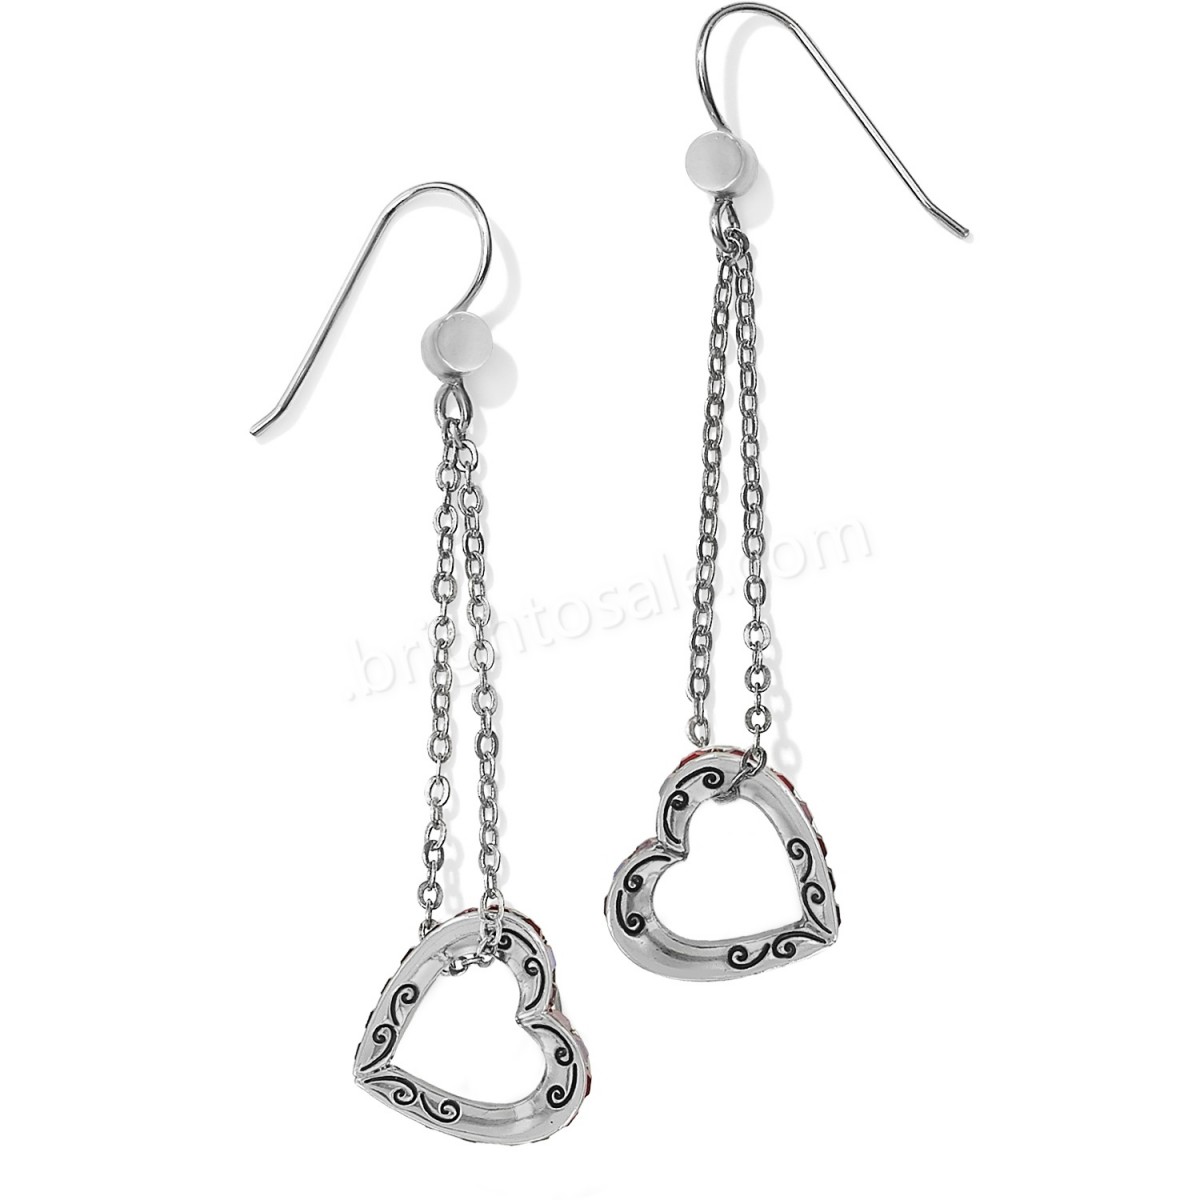 Brighton Collectibles & Online Discount Twinkle Post Drop Long Earrings - -1